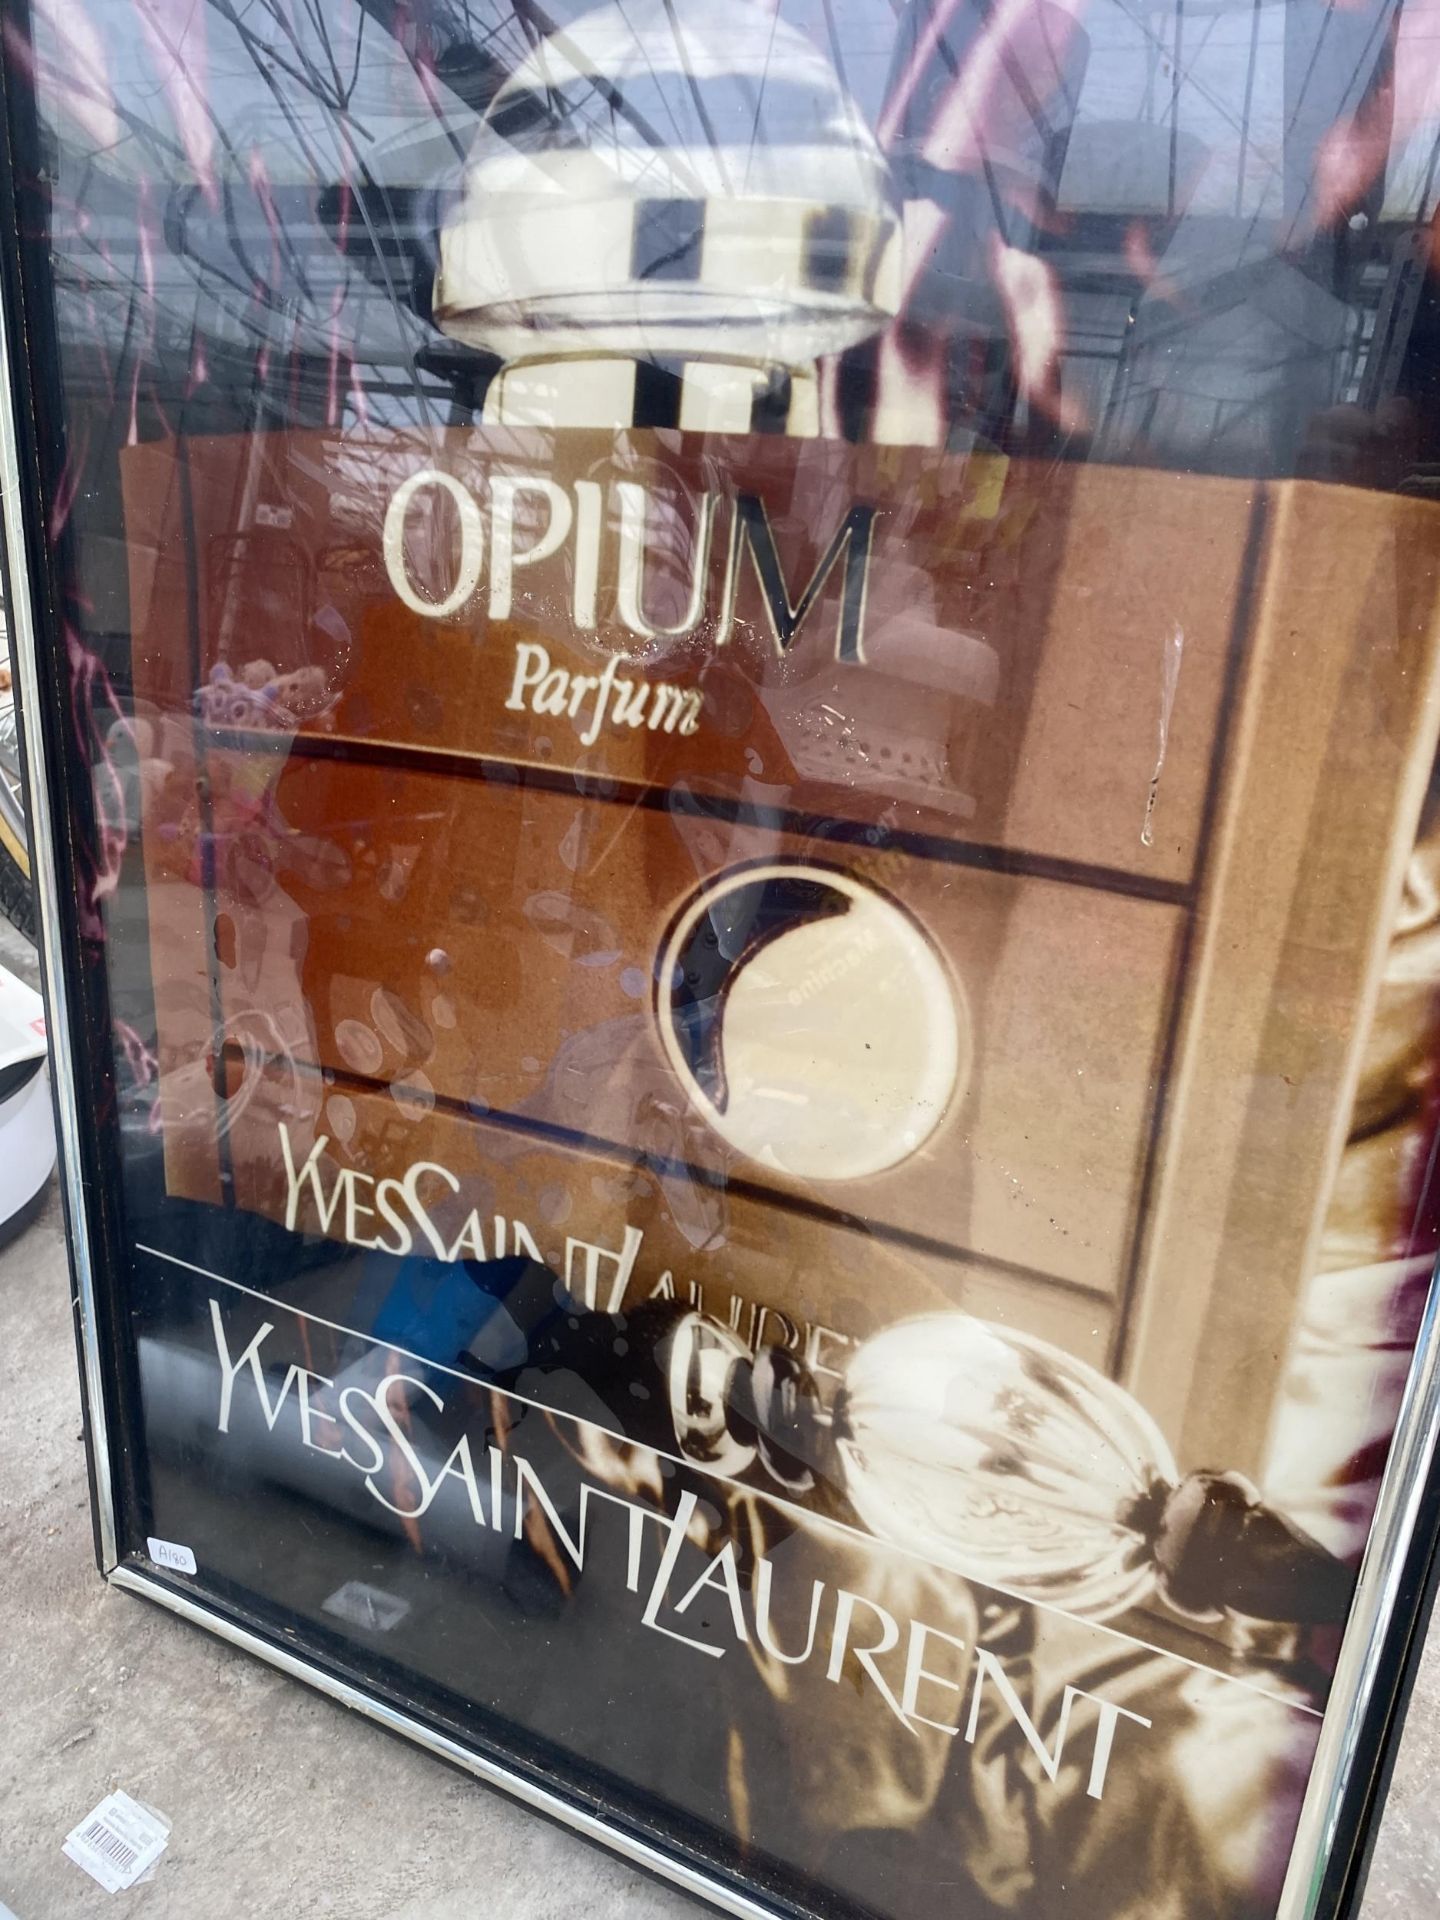 AN YVES SAINT LAURENT OPIUM ILLUMINATED ADVERTISING BOARD SEEN WORKING BUT NO WARRANTY - Image 2 of 3